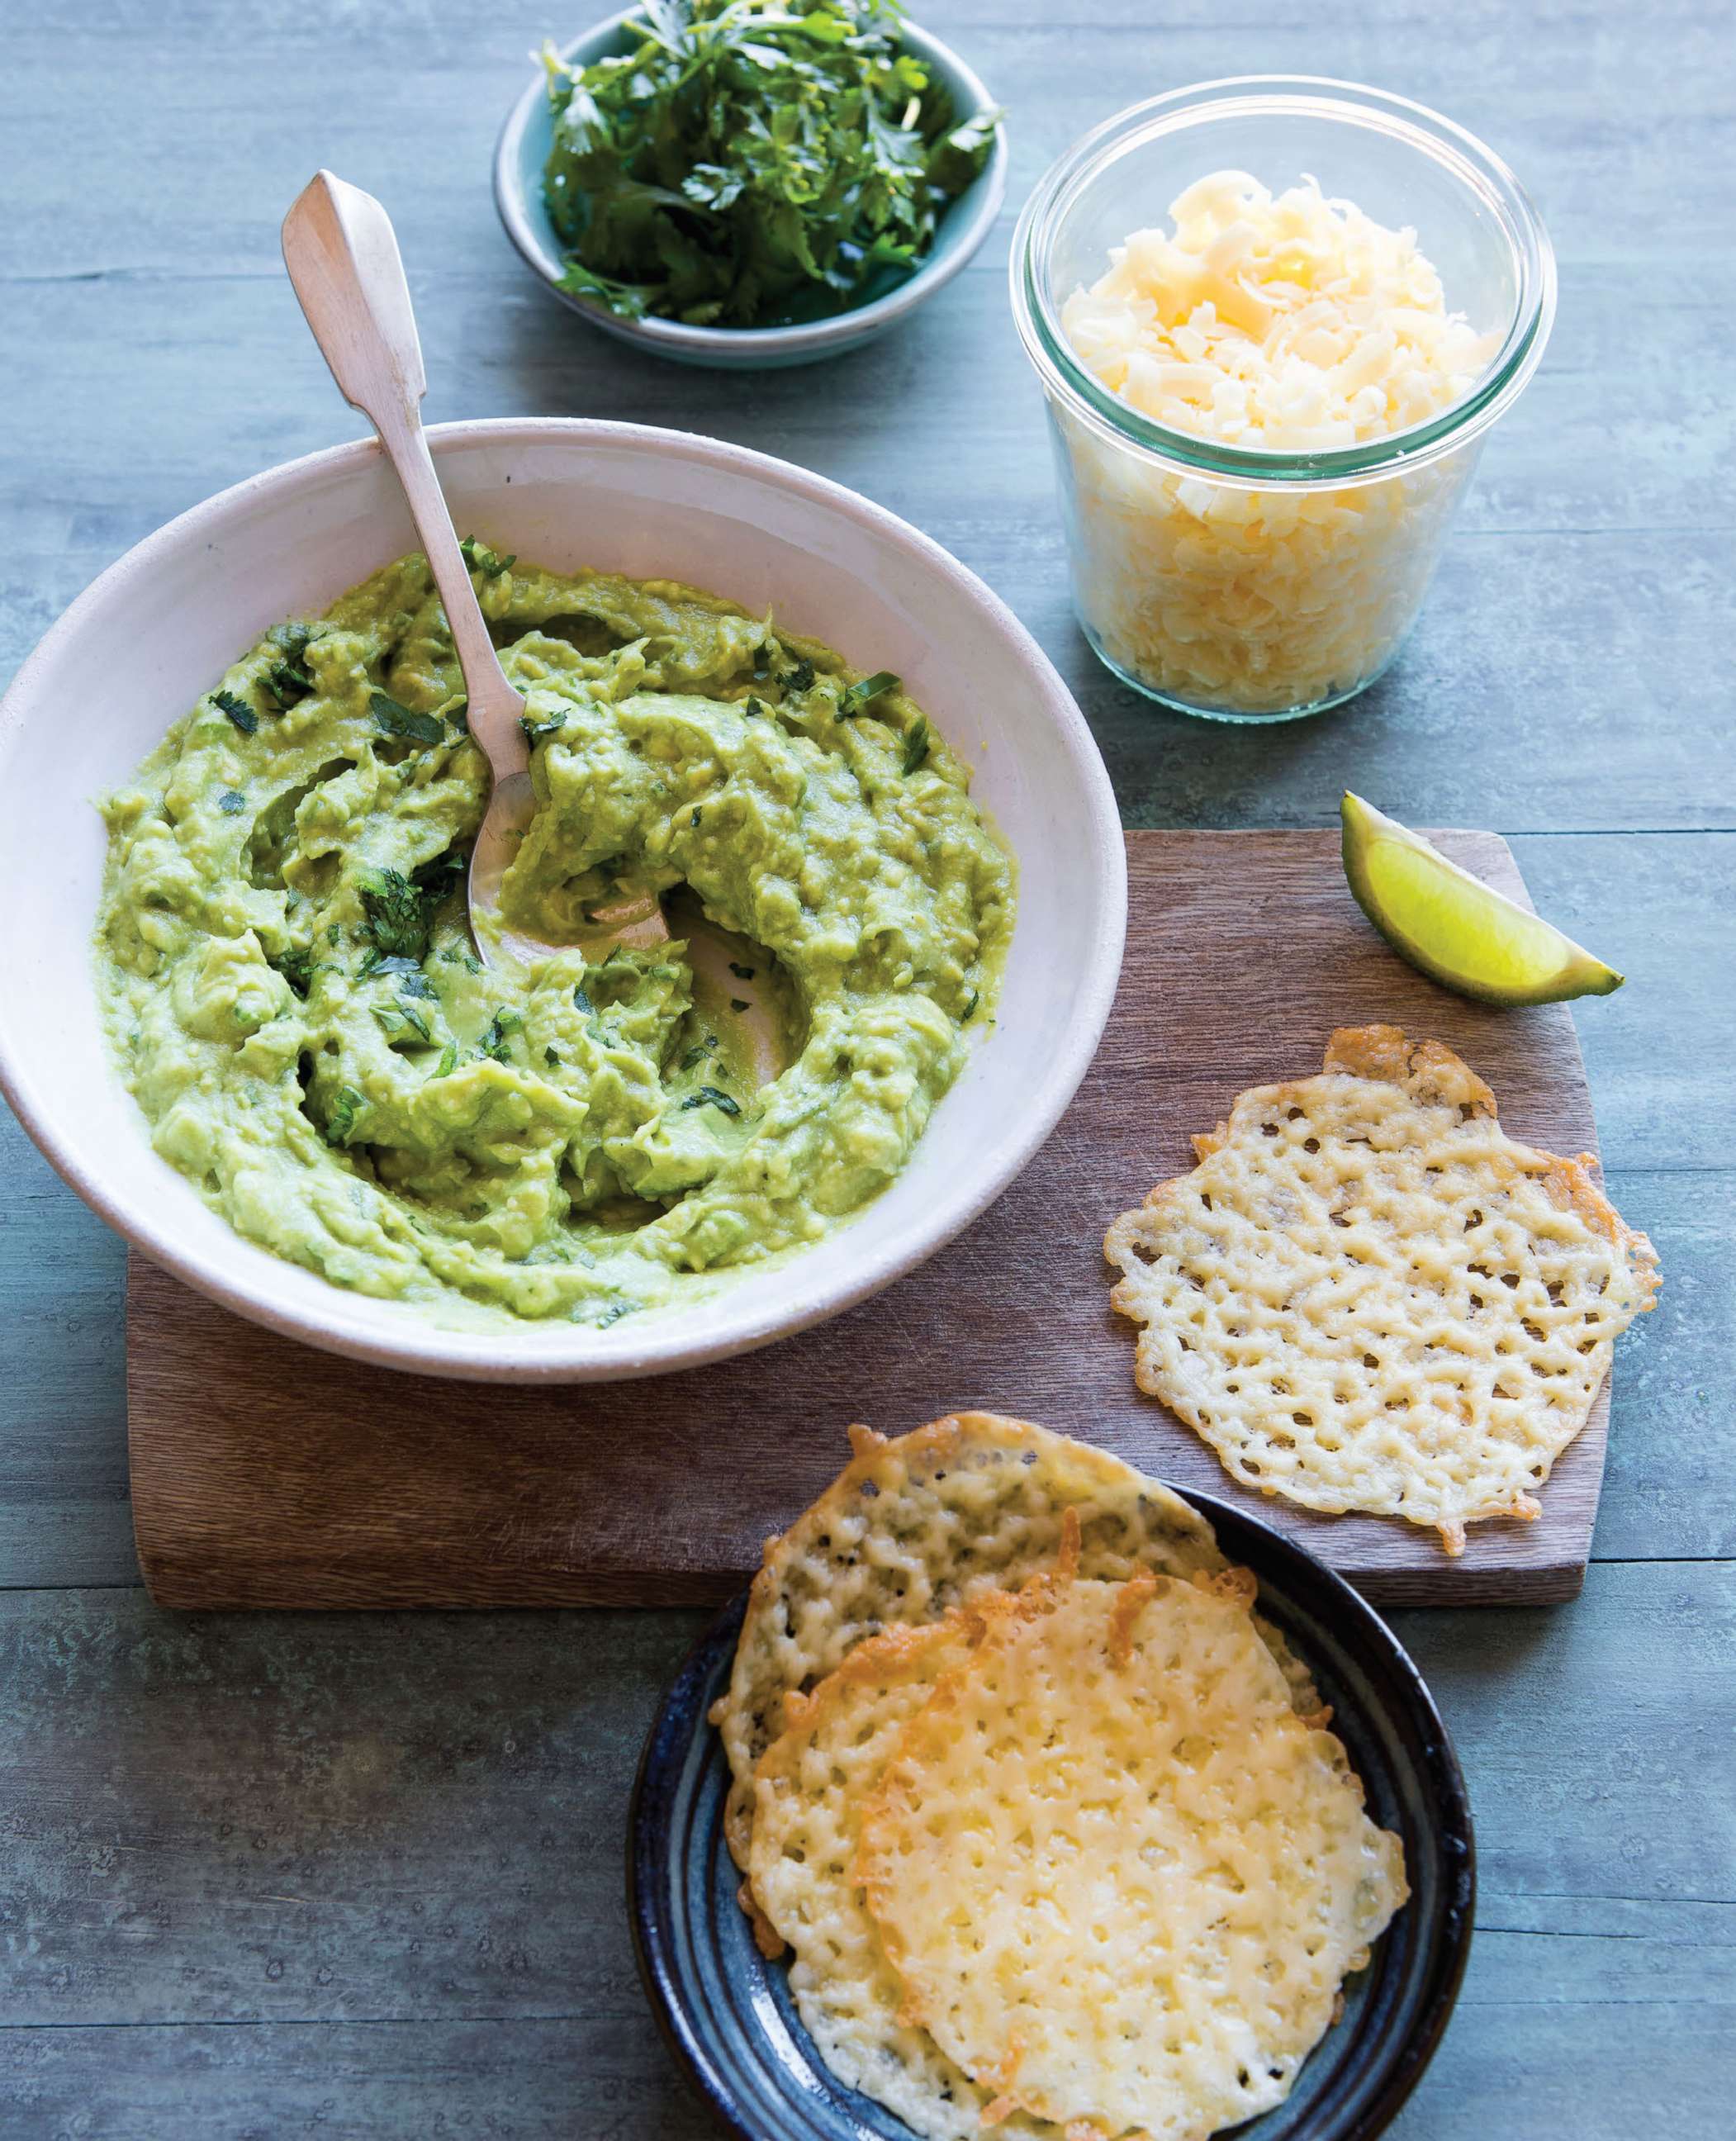 PHOTO: Cheese chips and guacamole by Jen Fisch of KetoIntheCity.com.